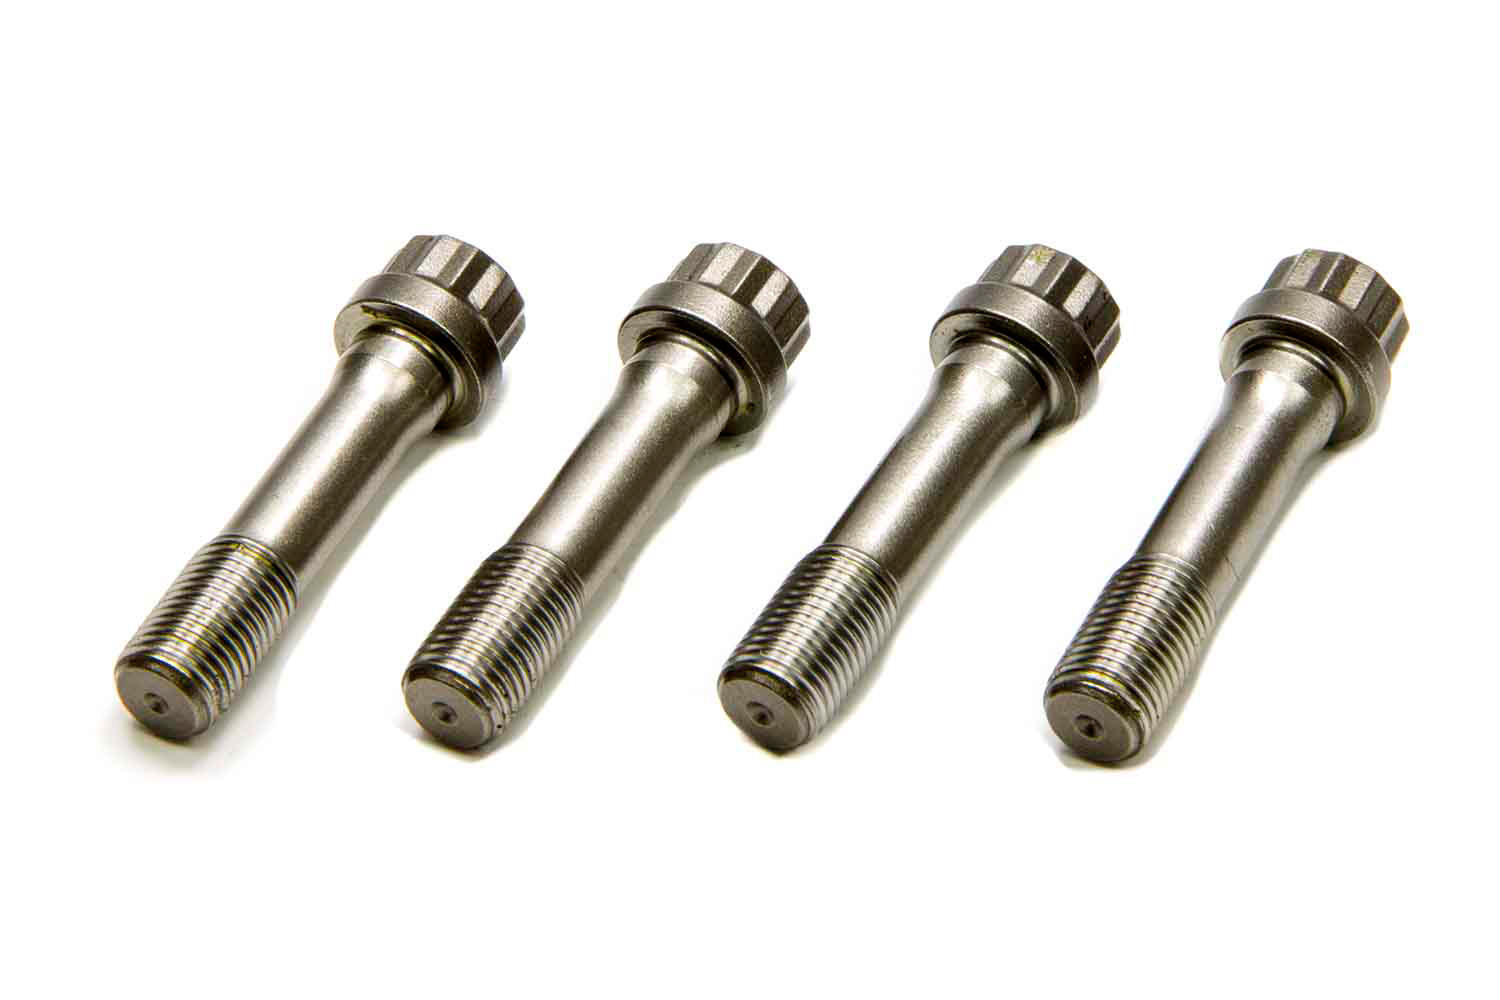 Manley 42351-4 Connecting Rod Bolt Kit, 3/8 in Bolt, 1.600 in Long, 12 Point Head, Chromoly, Set of 4